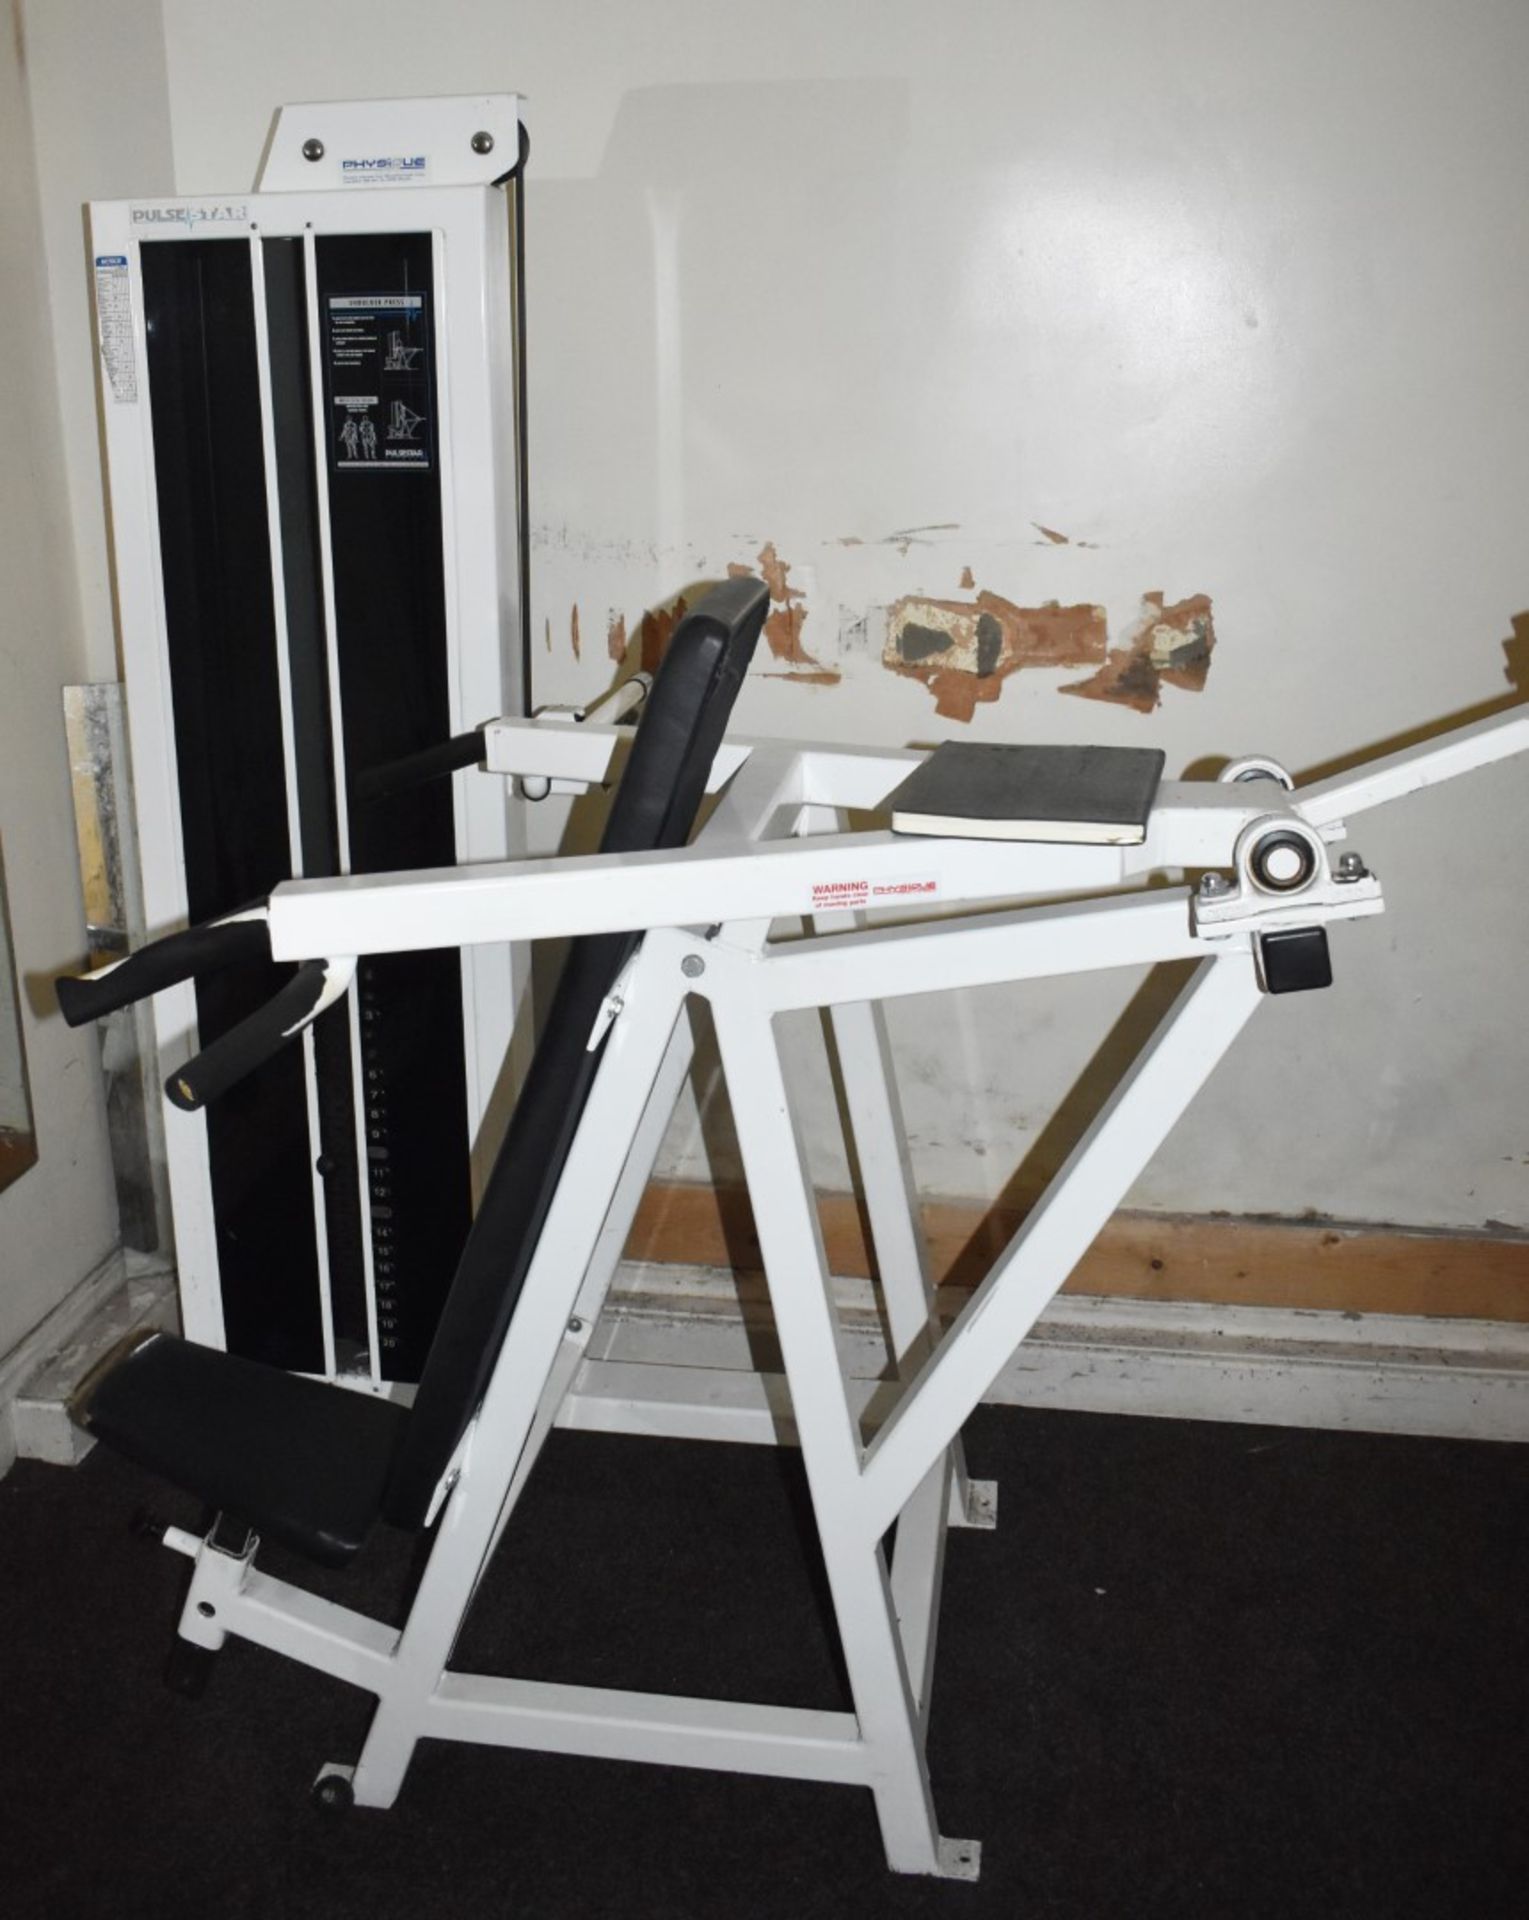 Contents of Bodybuilding and Strongman Gym - Includes Approx 30 Pieces of Gym Equipment, Floor Mats, - Image 20 of 95